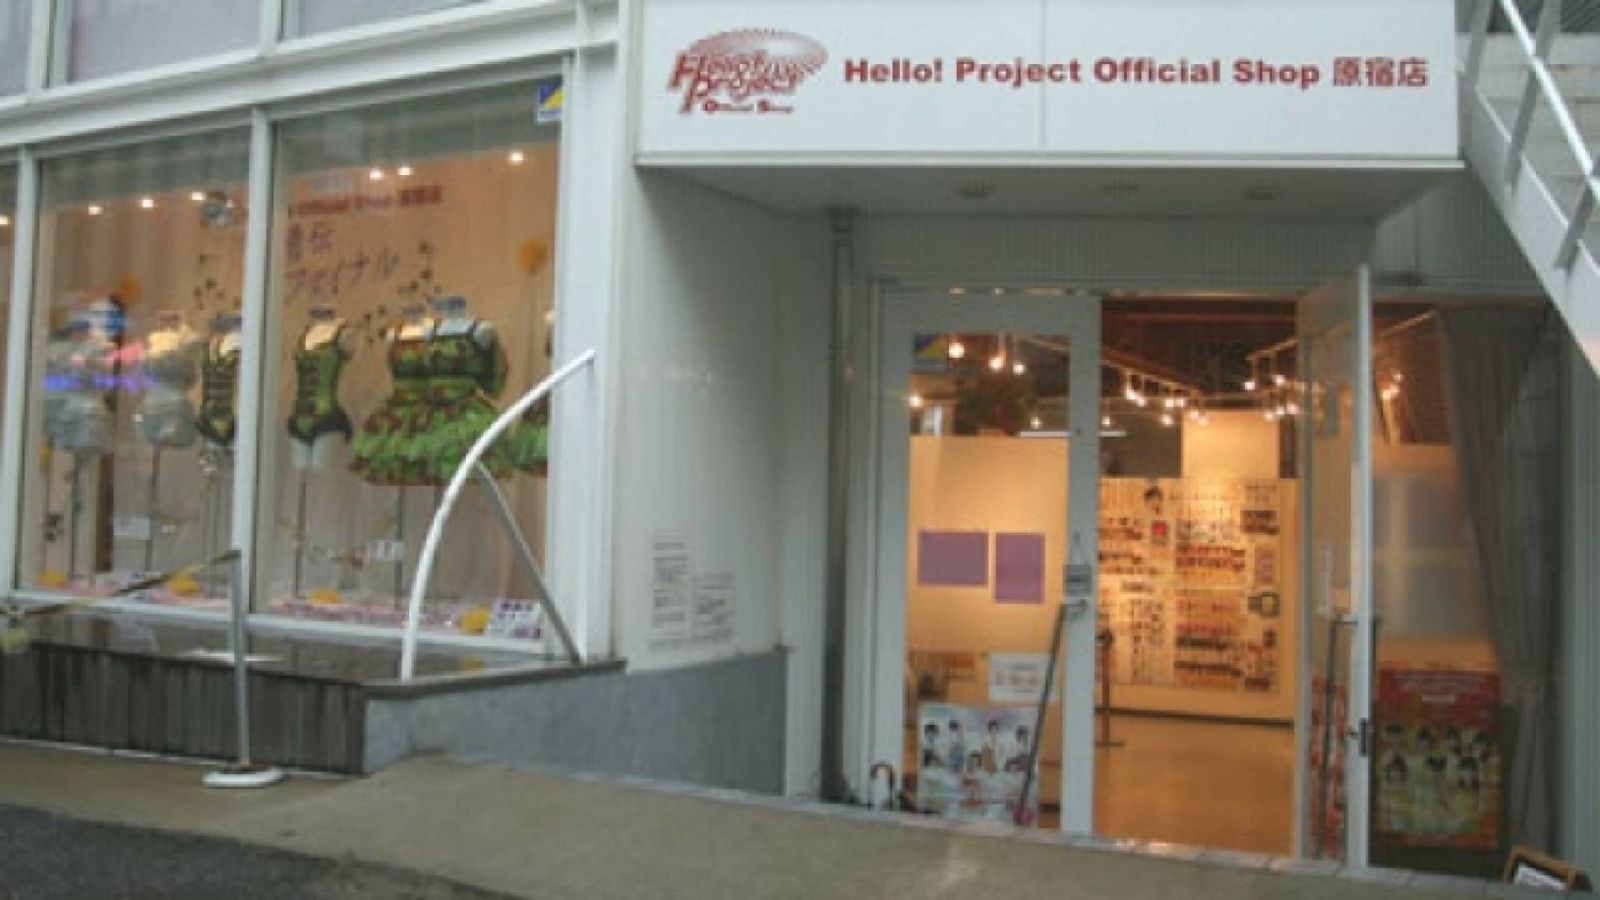 Presentation of the Hello! Project Official Shop in Harajuku © 2008 UP-FRONT AGENCY - JaME - Philippe Hayot